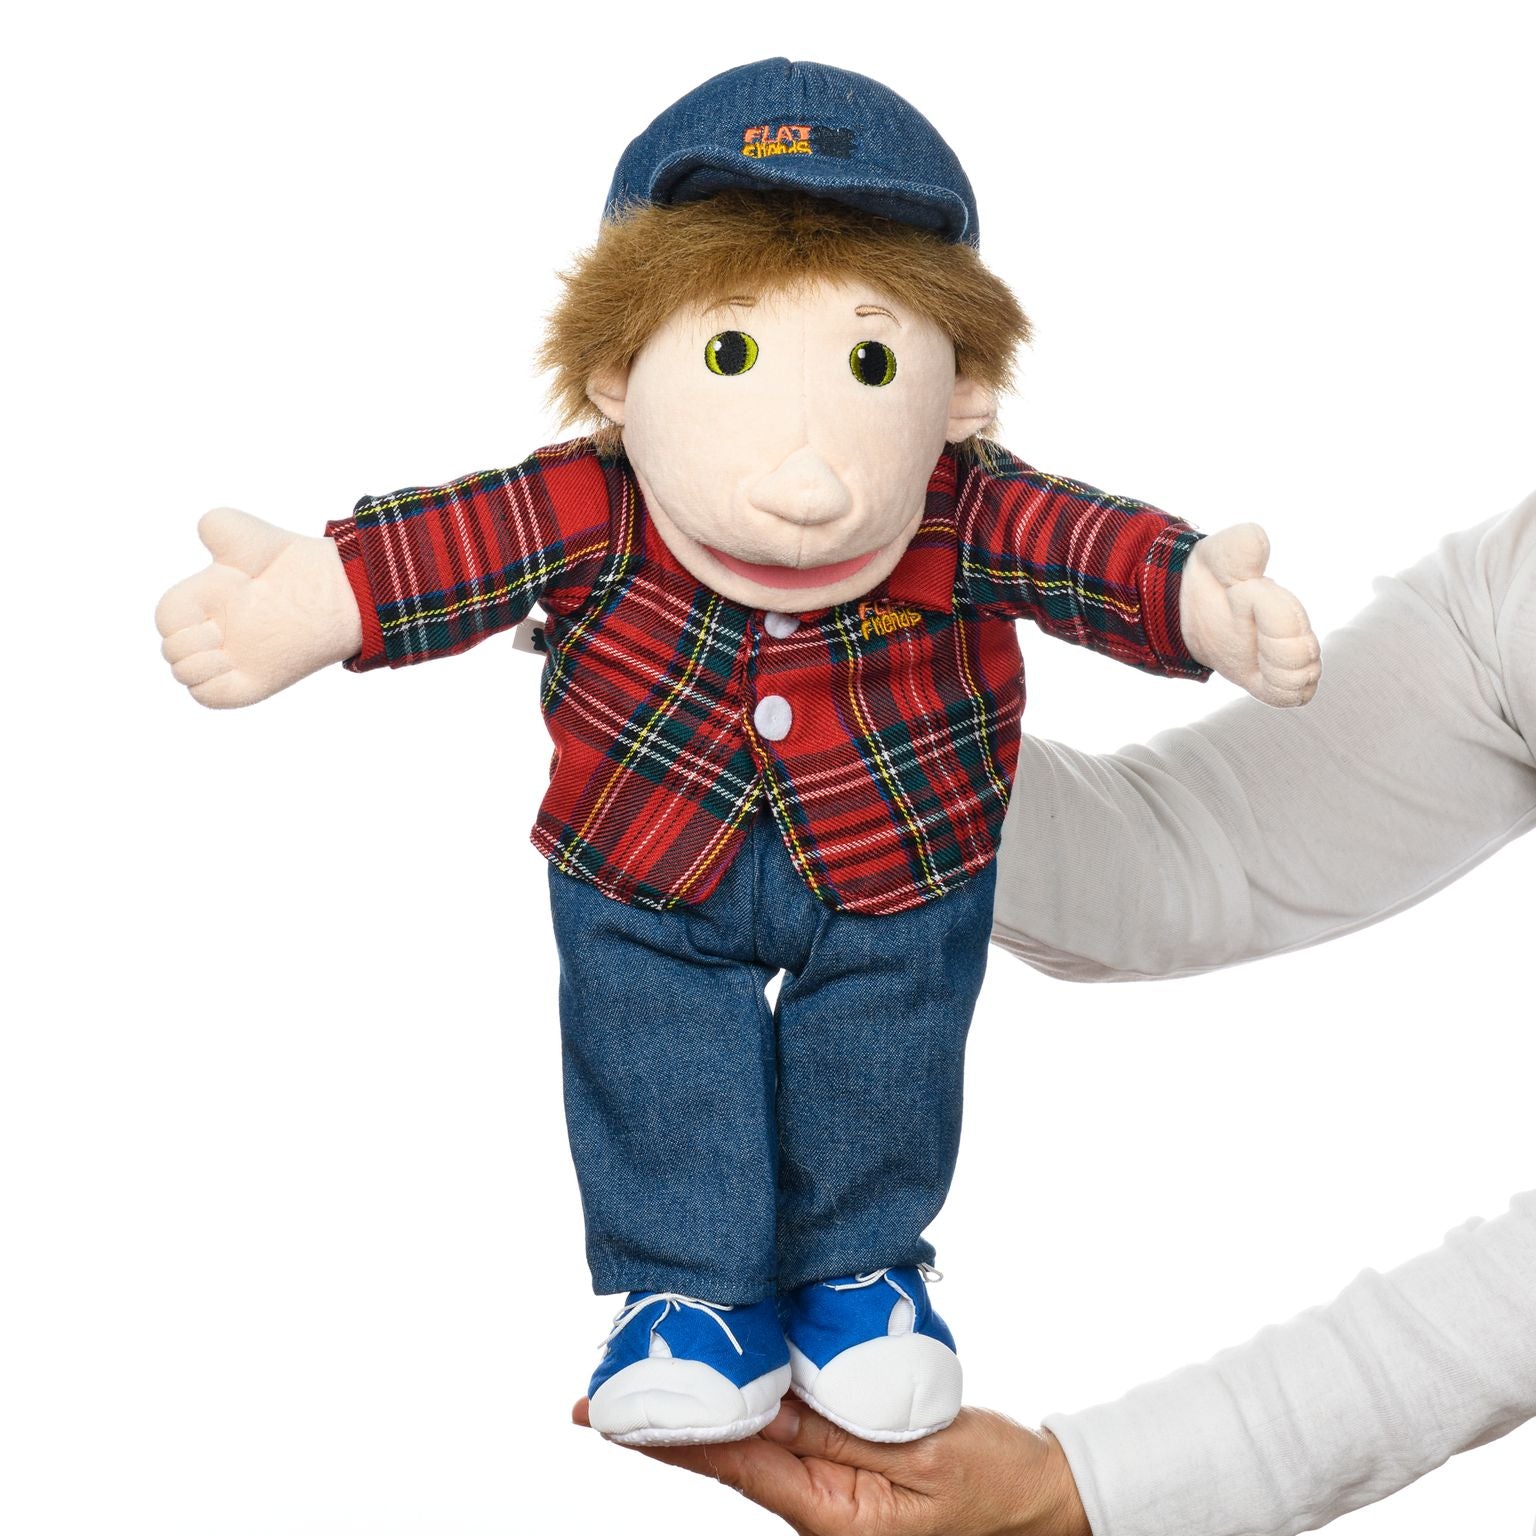 Hand Puppet - Boy, Dressed in Casual Street Wear from the USA